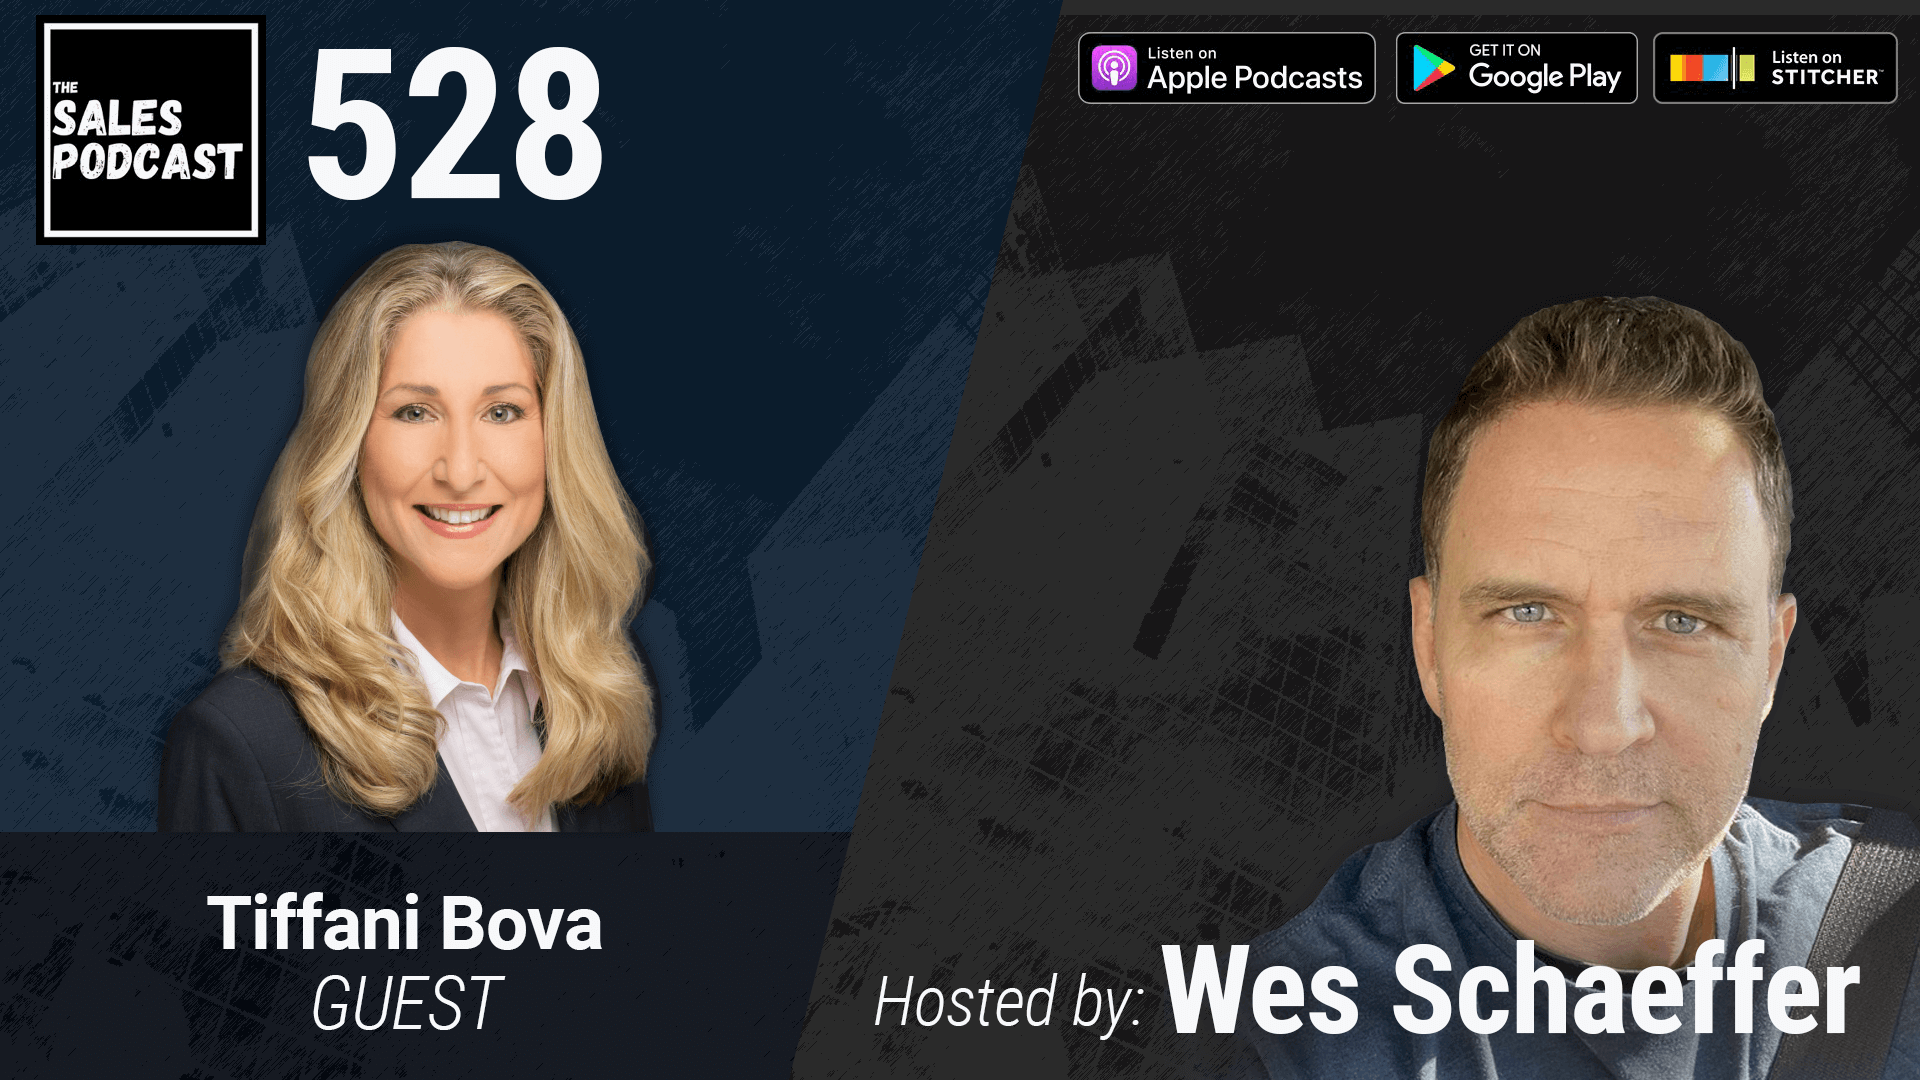 Grow Your Growth IQ With Tiffani Bova on The Sales Podcast with Wes Schaeffer, The Sales Whisperer®